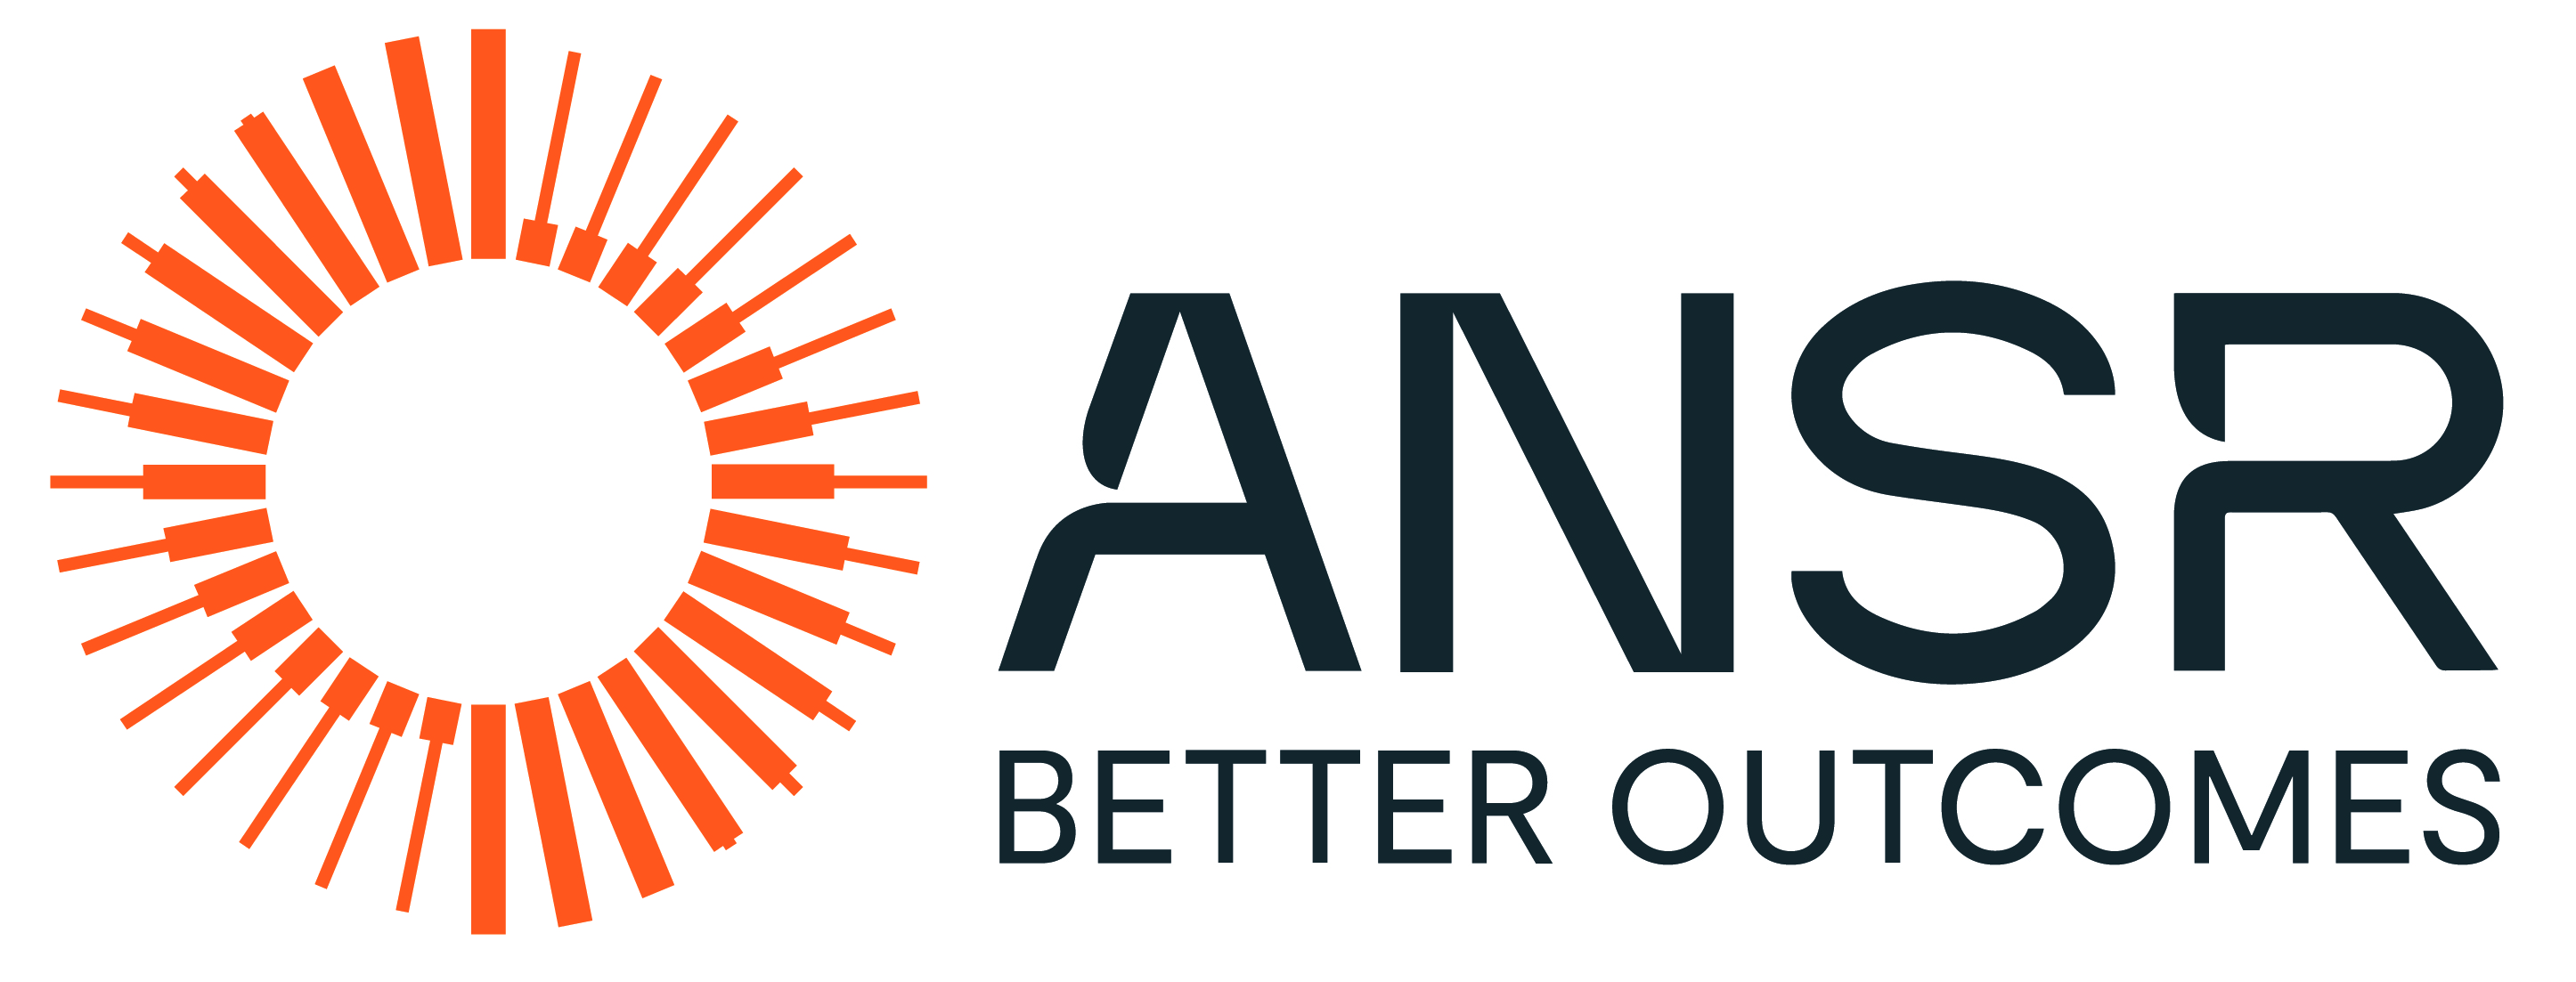 ANSR Appoints Kirk Ball as Group Chief Information Officer